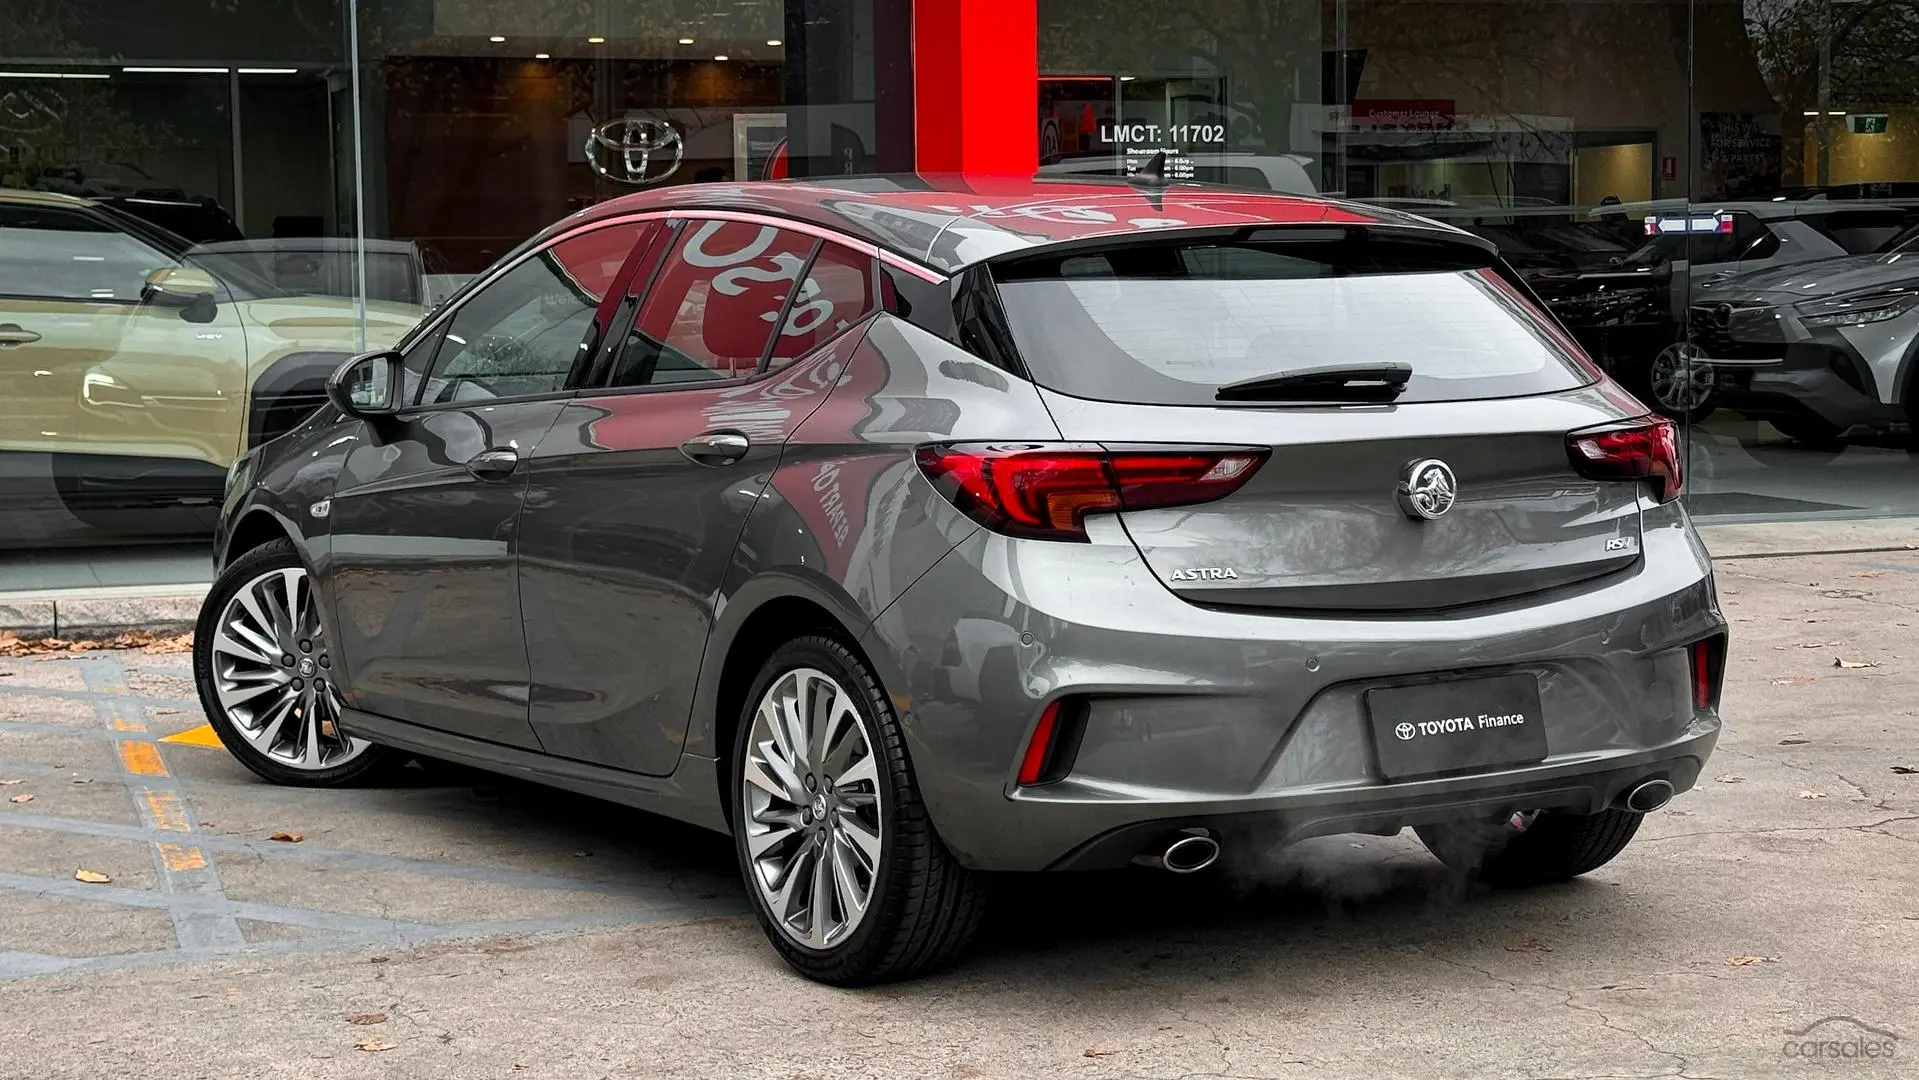 2017 Holden Astra Image 2